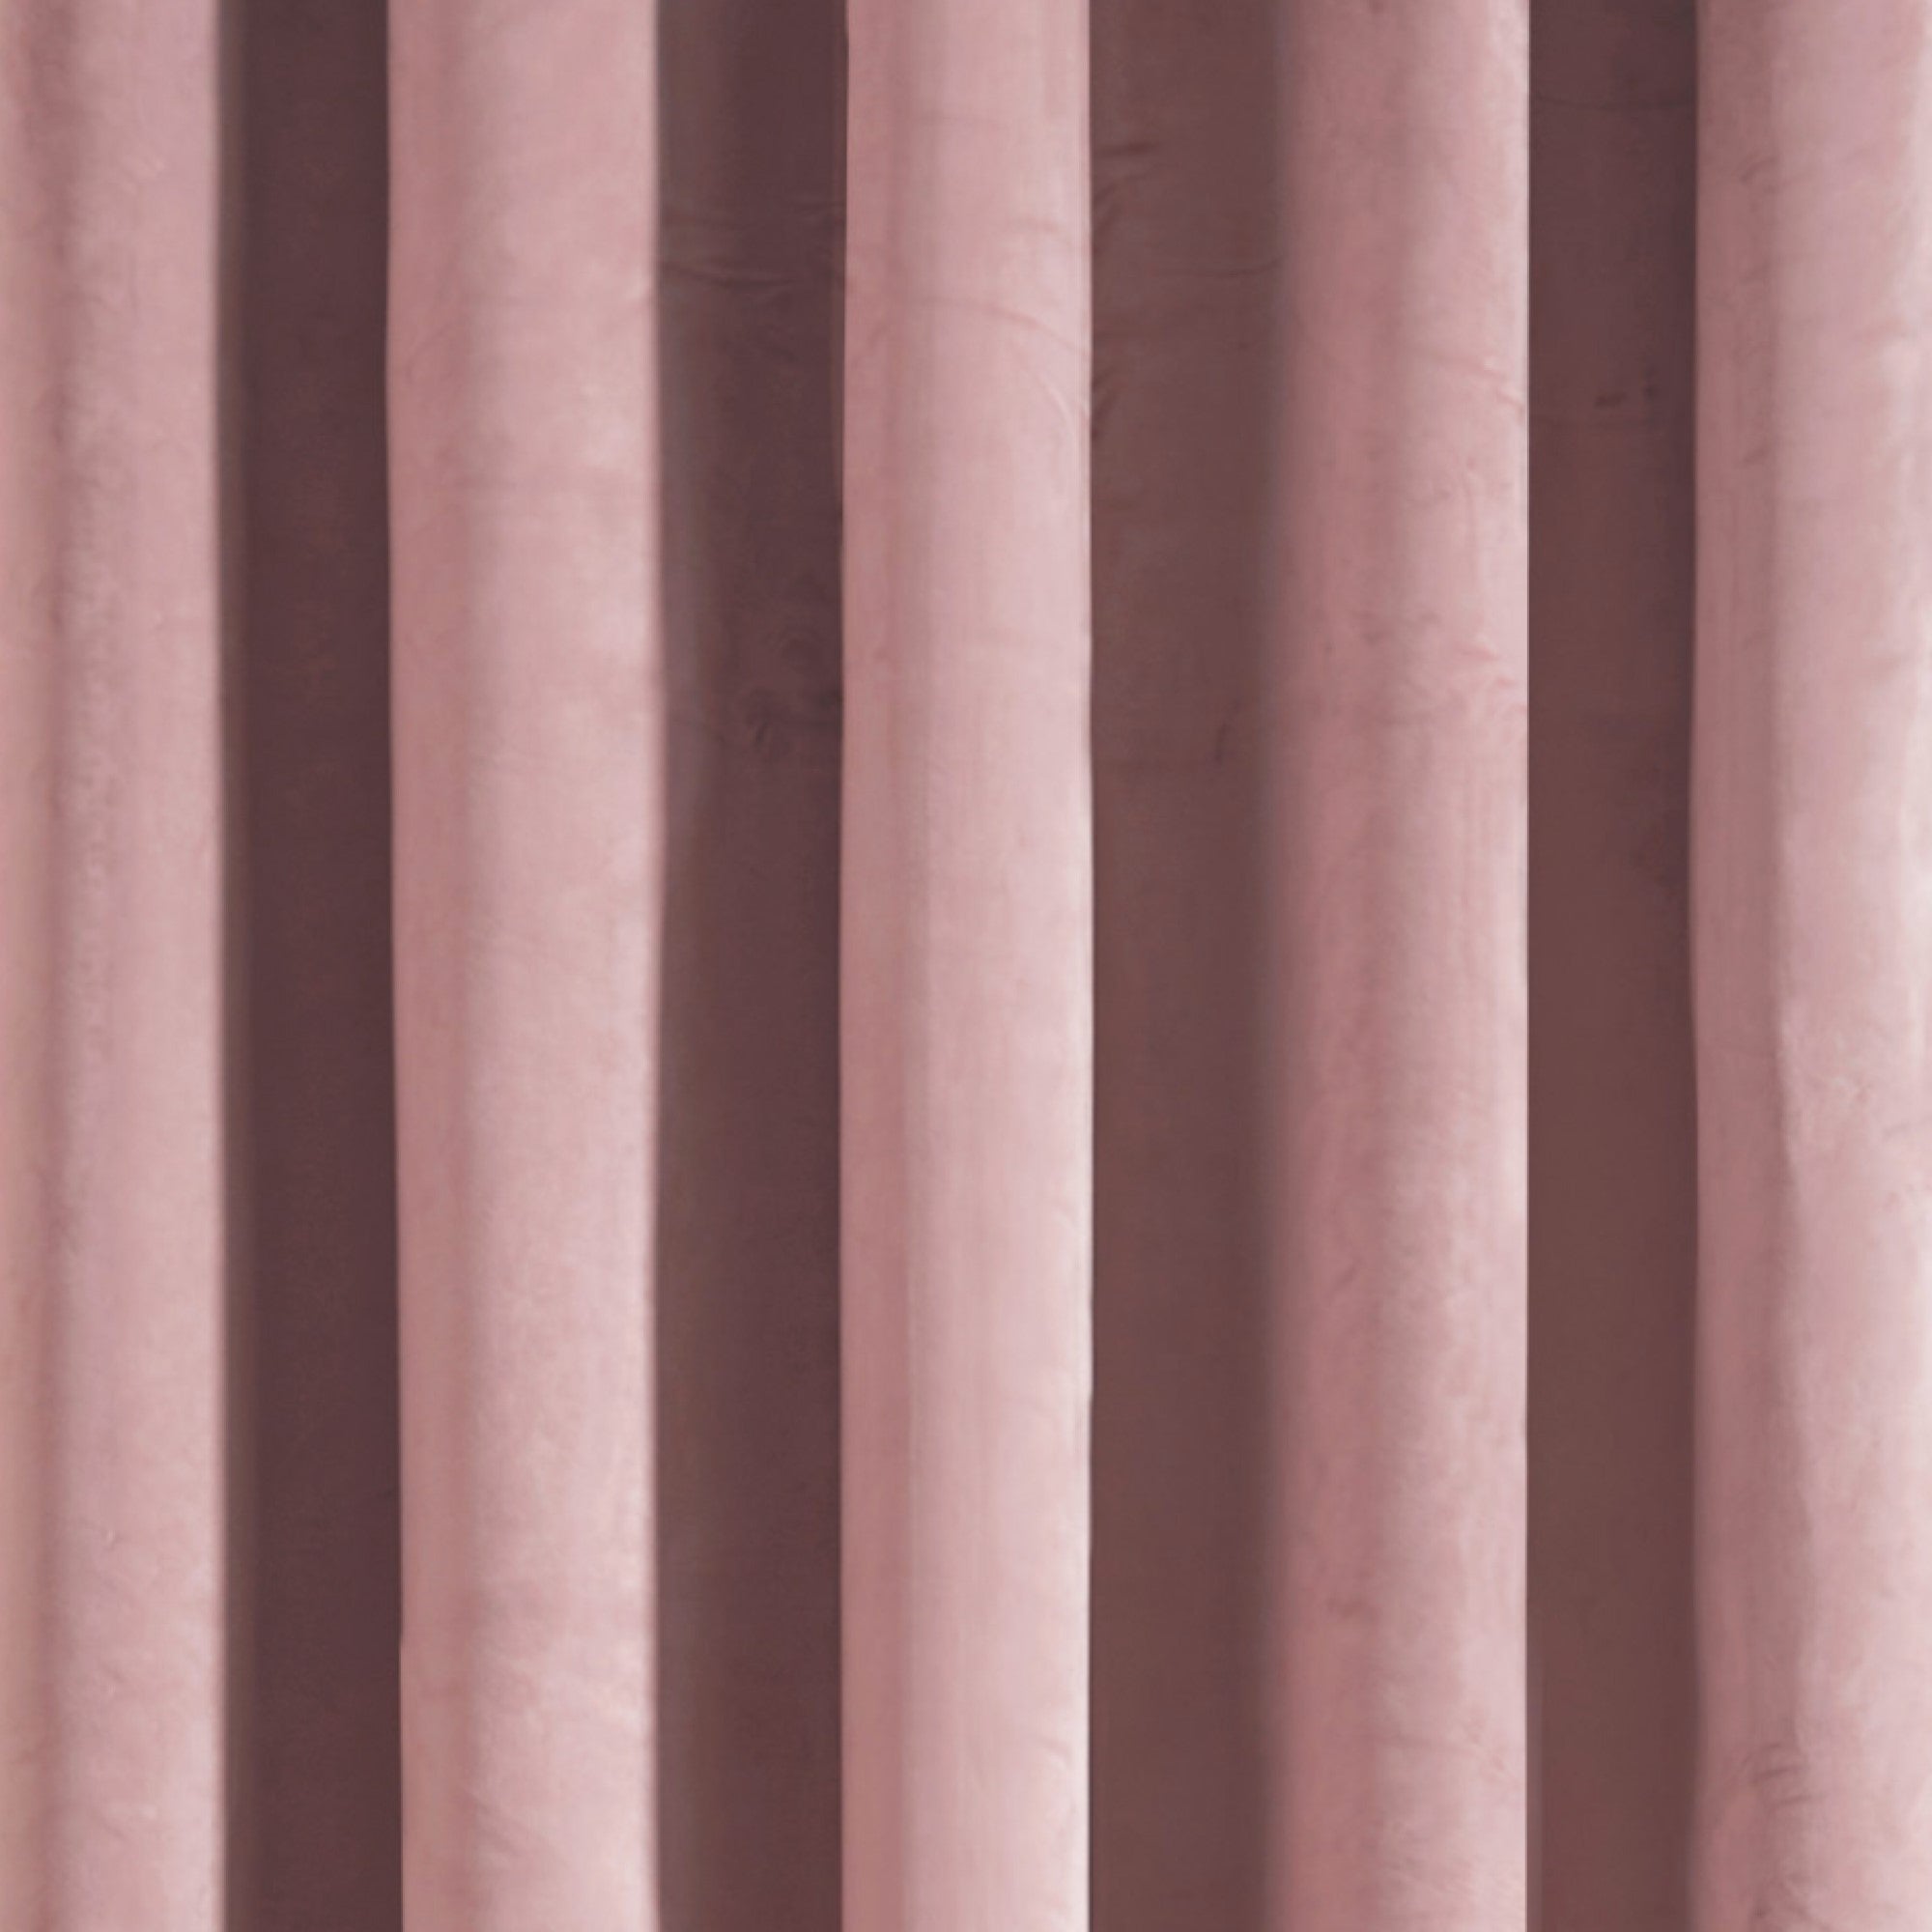 Eyelet Single Panel Door Curtain Montrose by Laurence Llewelyn-Bowen in Blush